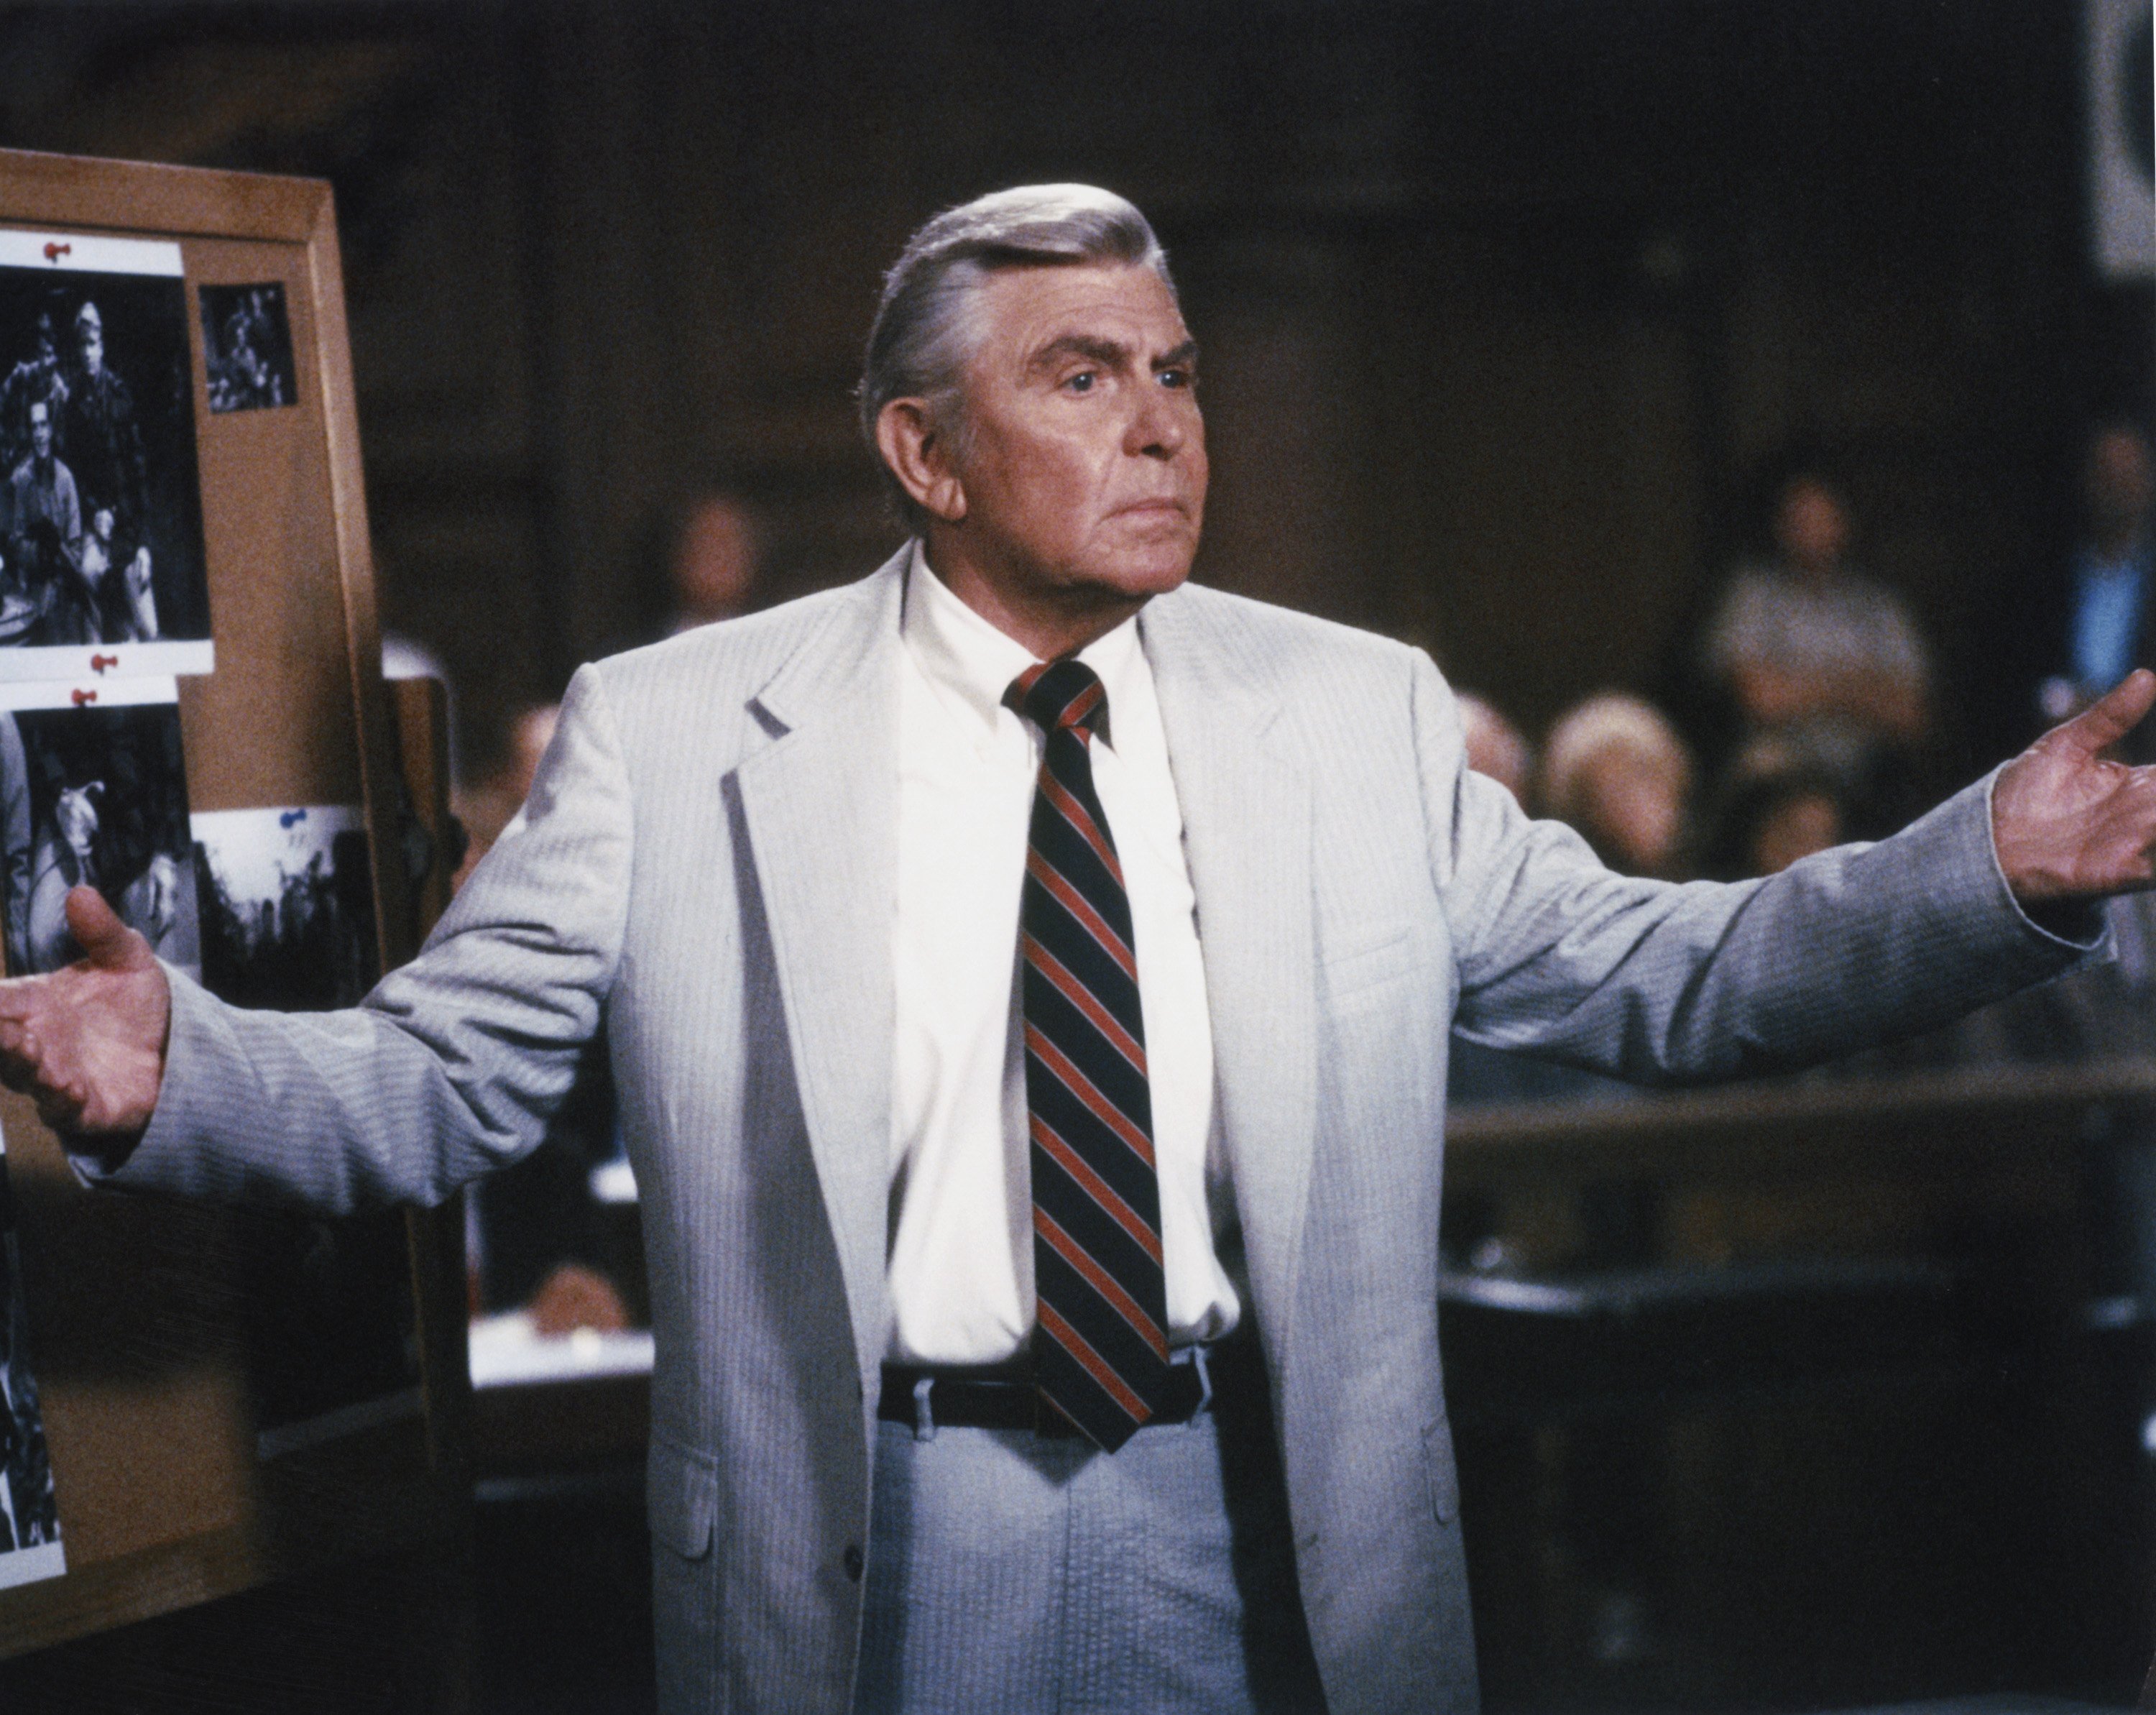 Andy Griffith stars as celebrated Atlanta attorney Benjamin Matlock and is pictured here addressing a courtroom in a scene from 'Matlock,' dressed in the character's classic gray suit.